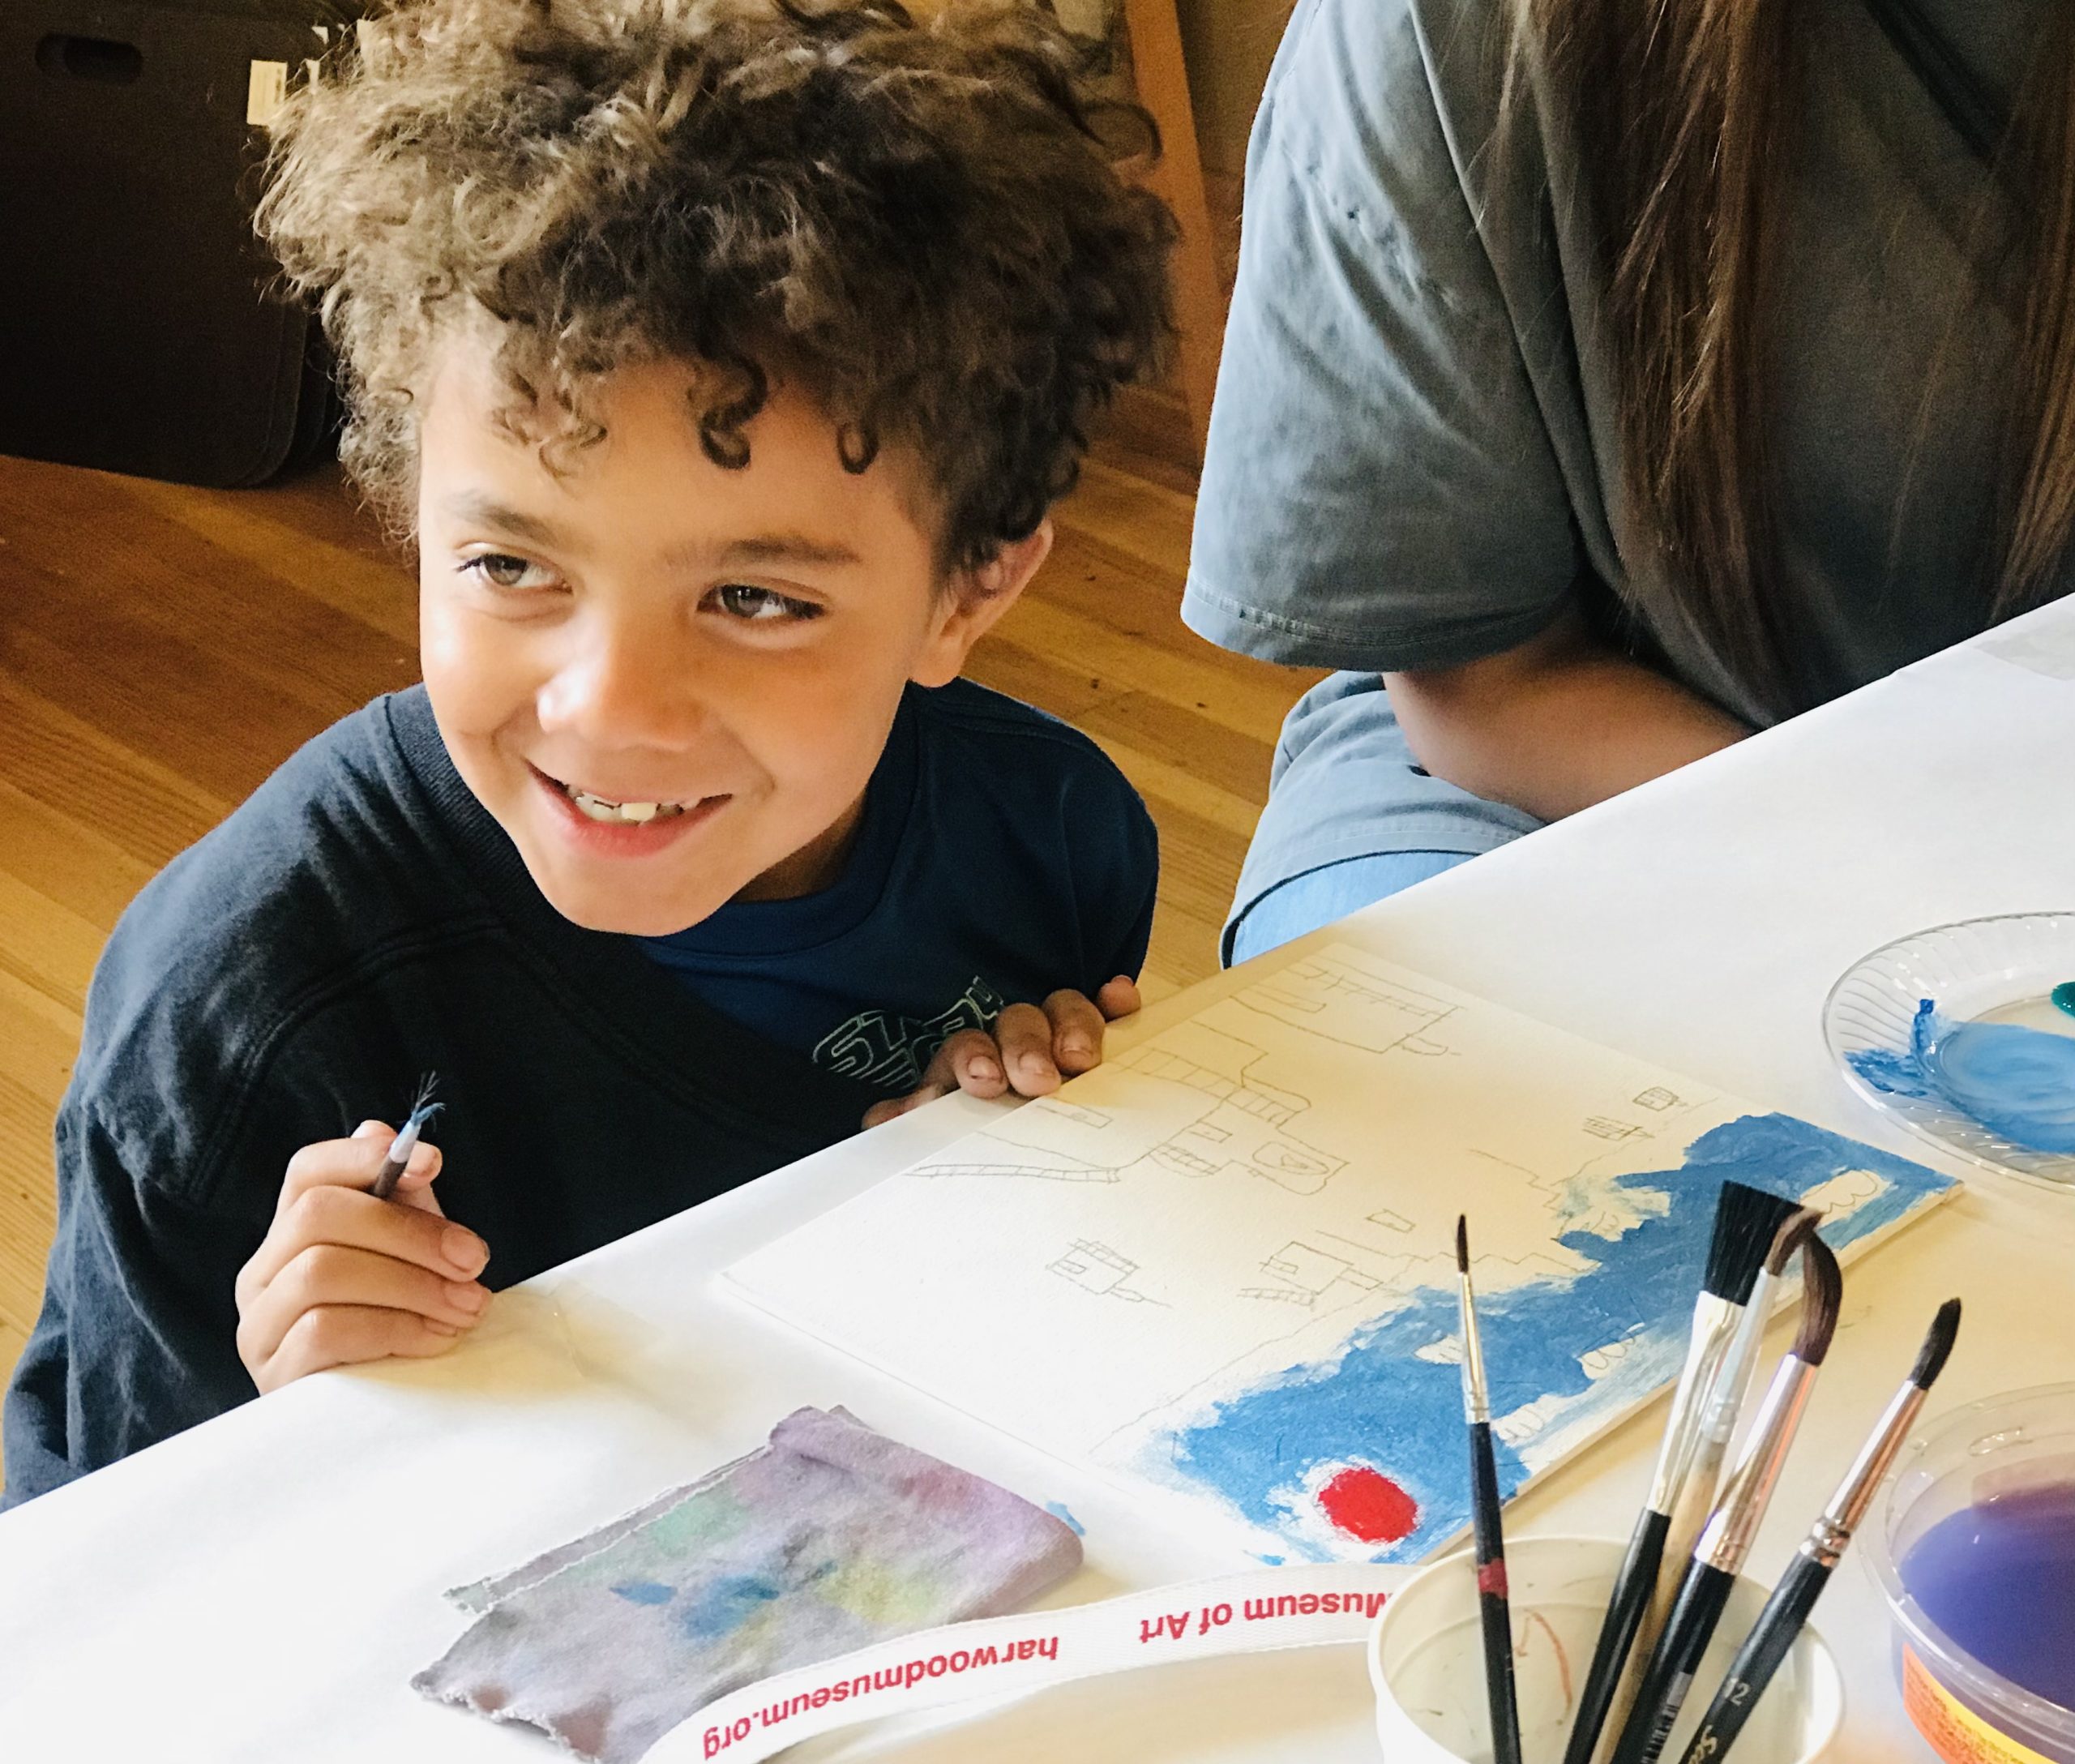 a young child smiles while in the middle of painting. 